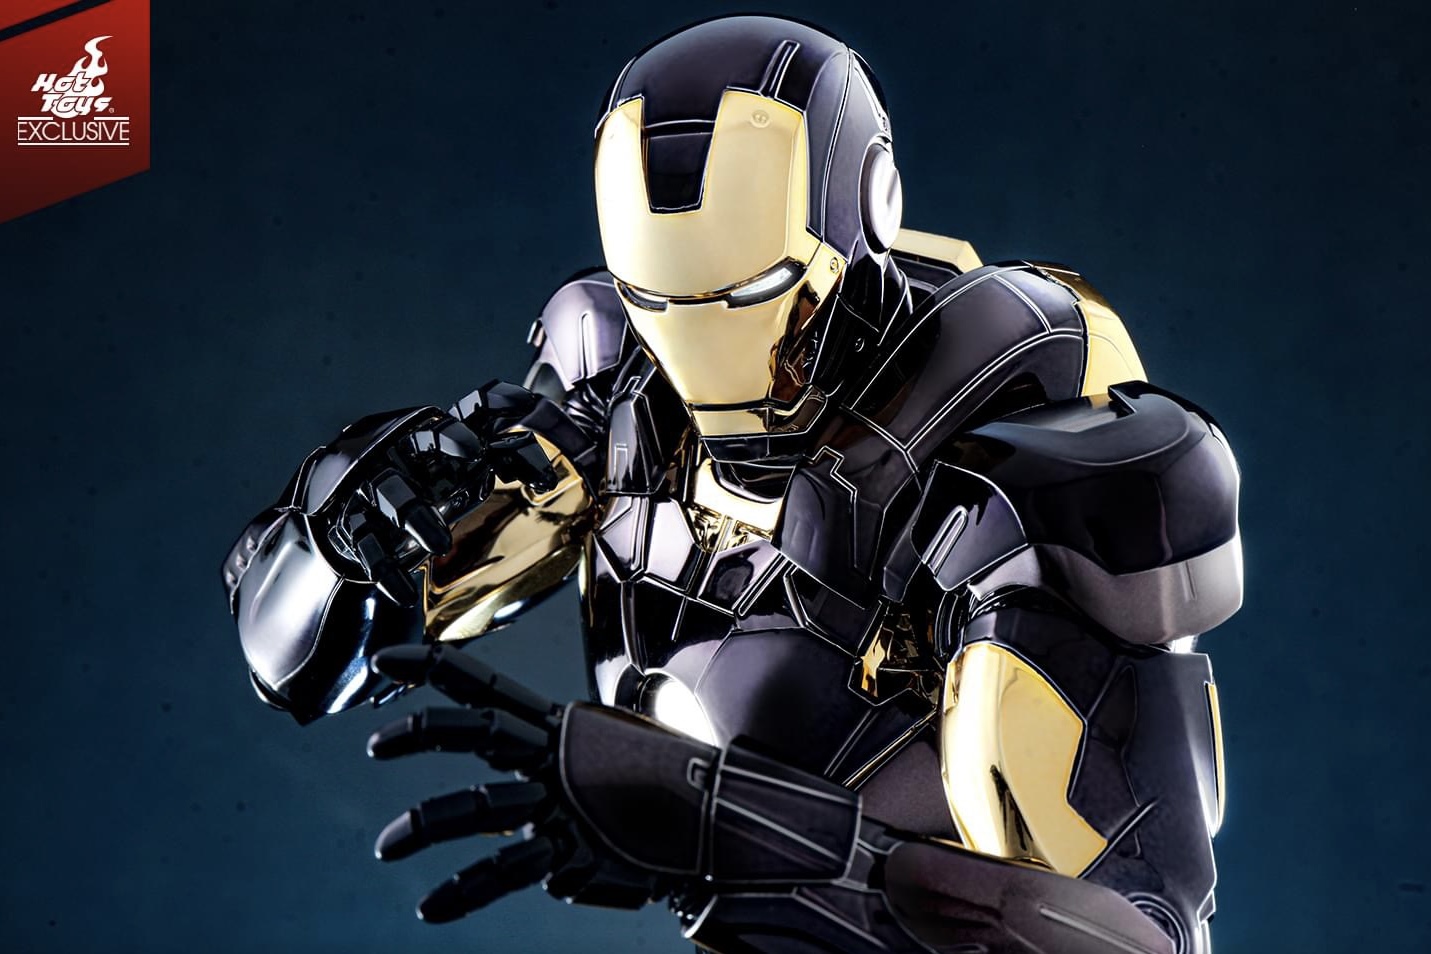 The Avengers: Iron Man Mark VII (Black & Gold Version) by Hot Toys